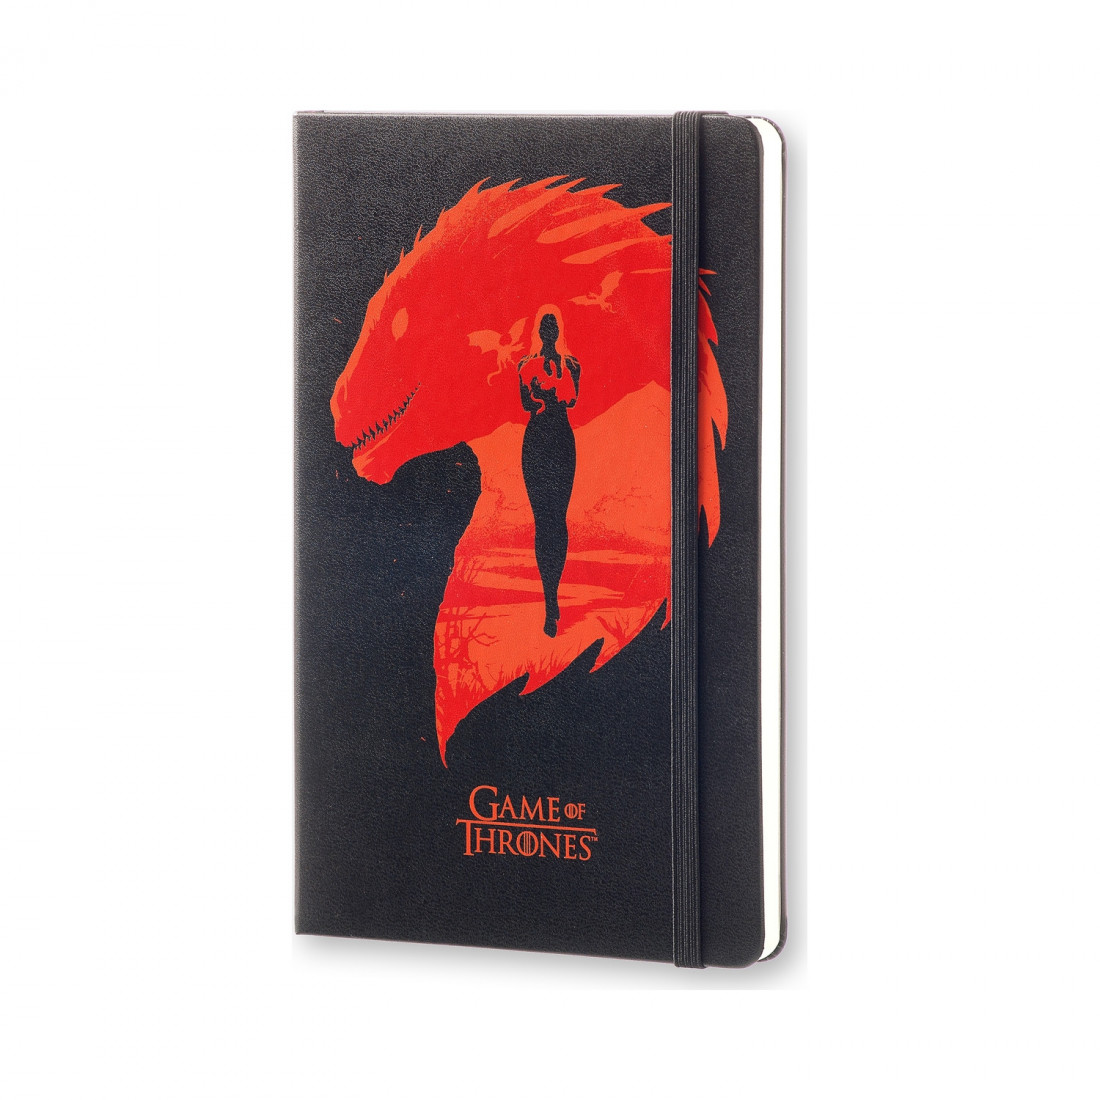 Notebook Large Limited Edition Game of Thrones - Black Plain Hard Cover 13x21 Moleskine